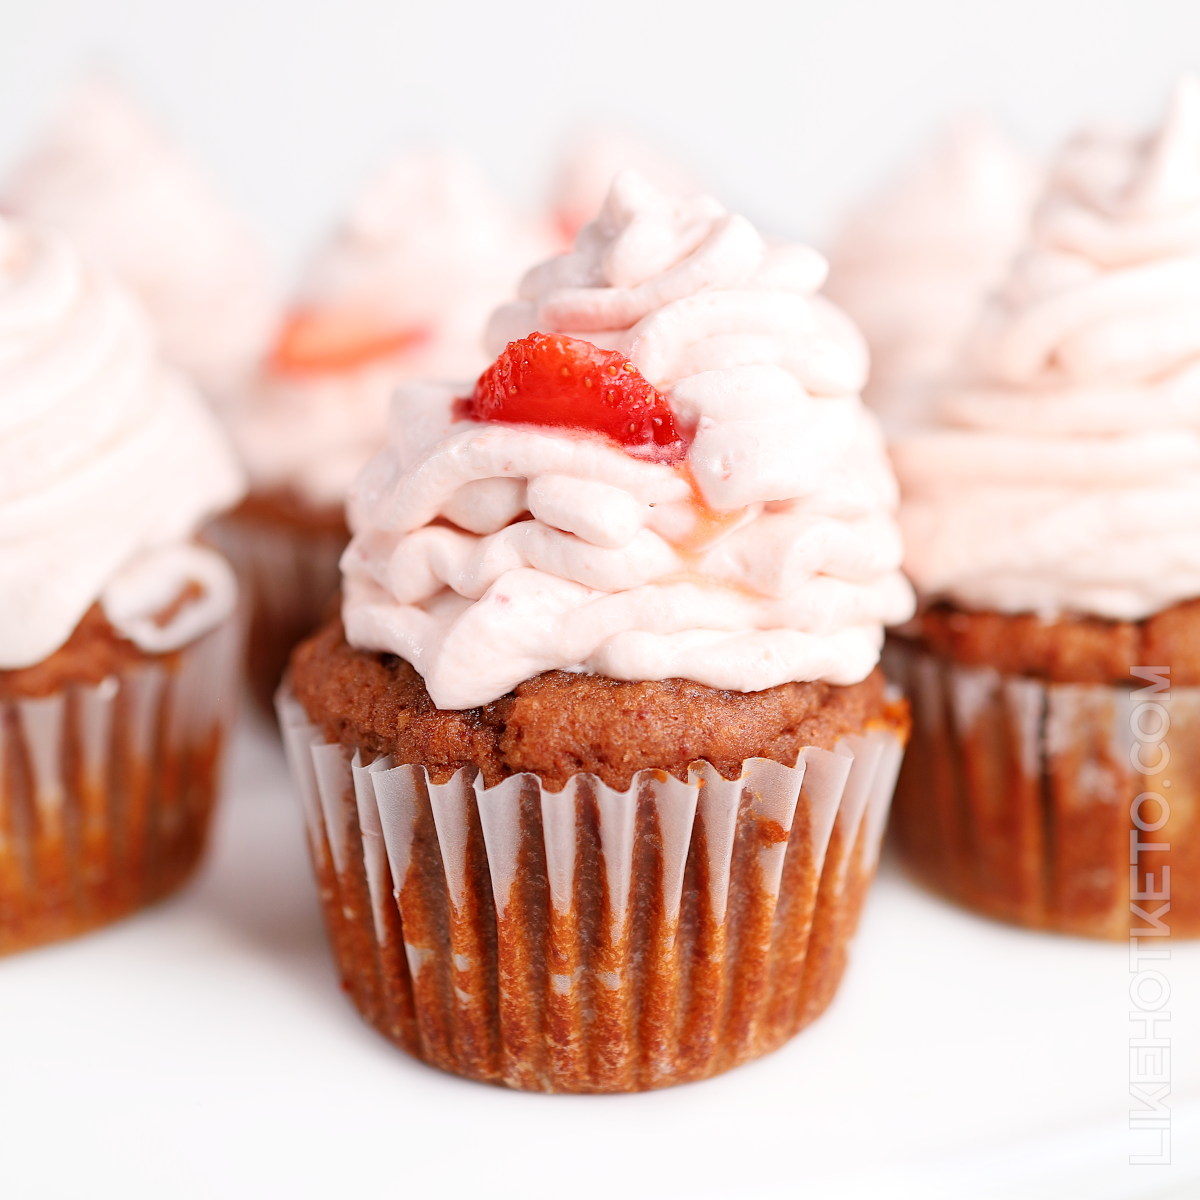 Pink keto strawberry cupcake with a tall strawberry cream cheese frosting and a strawberry slice.